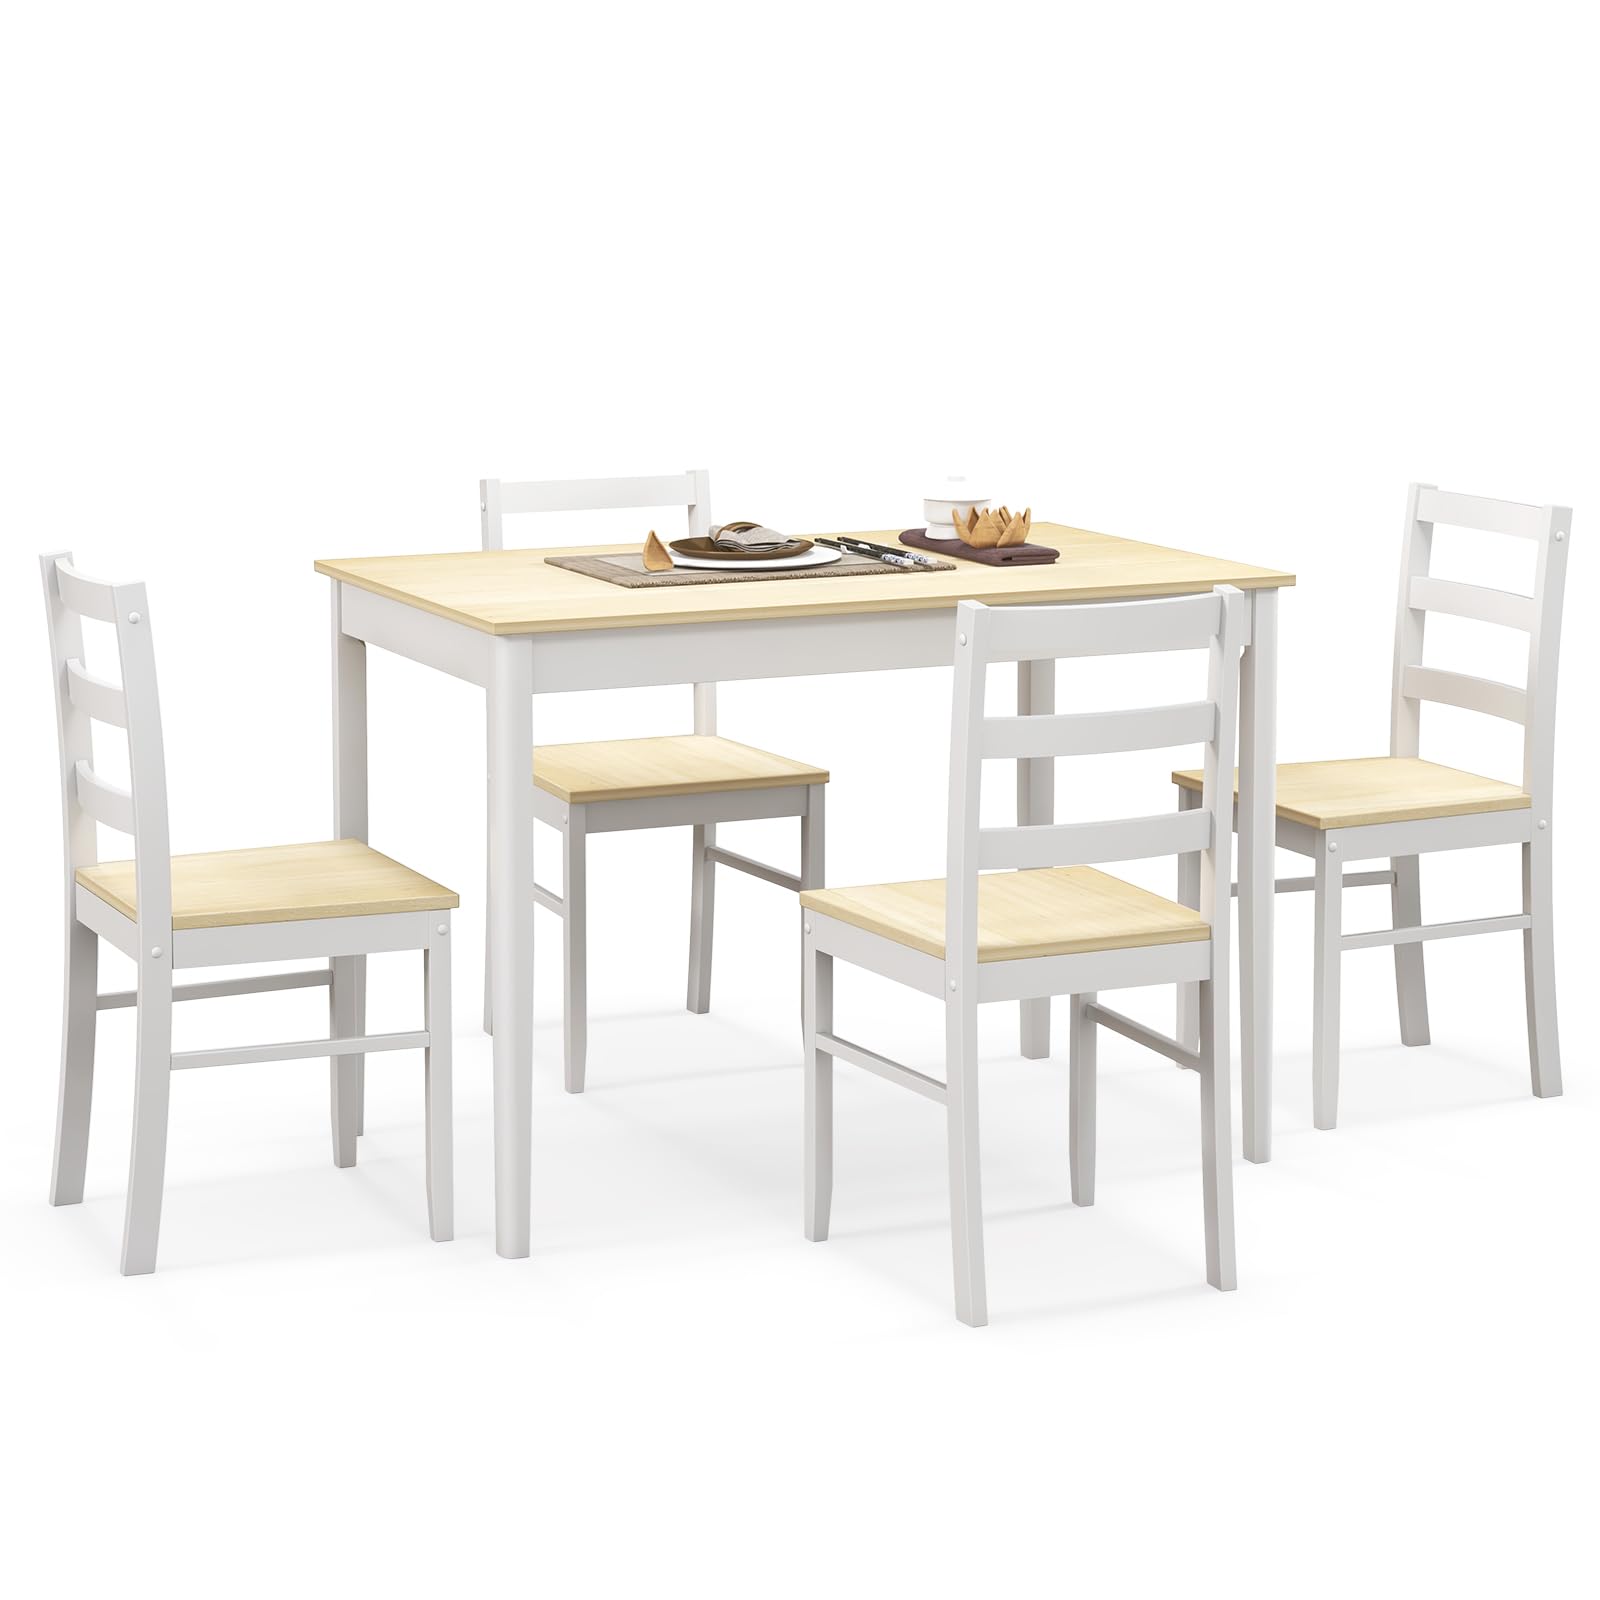 Giantex 5-Piece Dining Set of 4, Solid Wood Rectangular Table & 4 Chairs